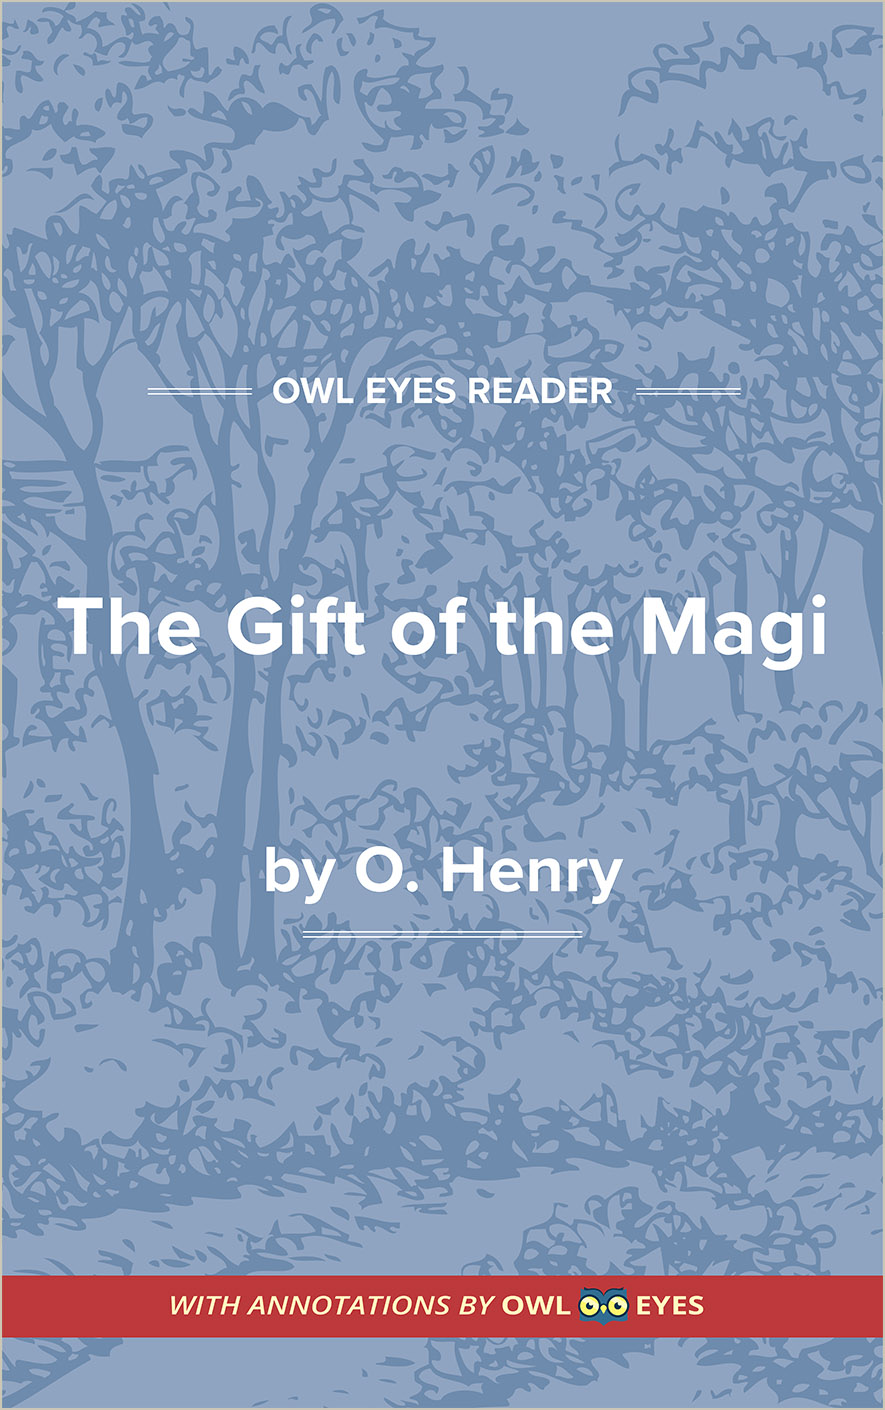 The Gift of the Magi written by O. Henry - My Short Stories-gemektower.com.vn